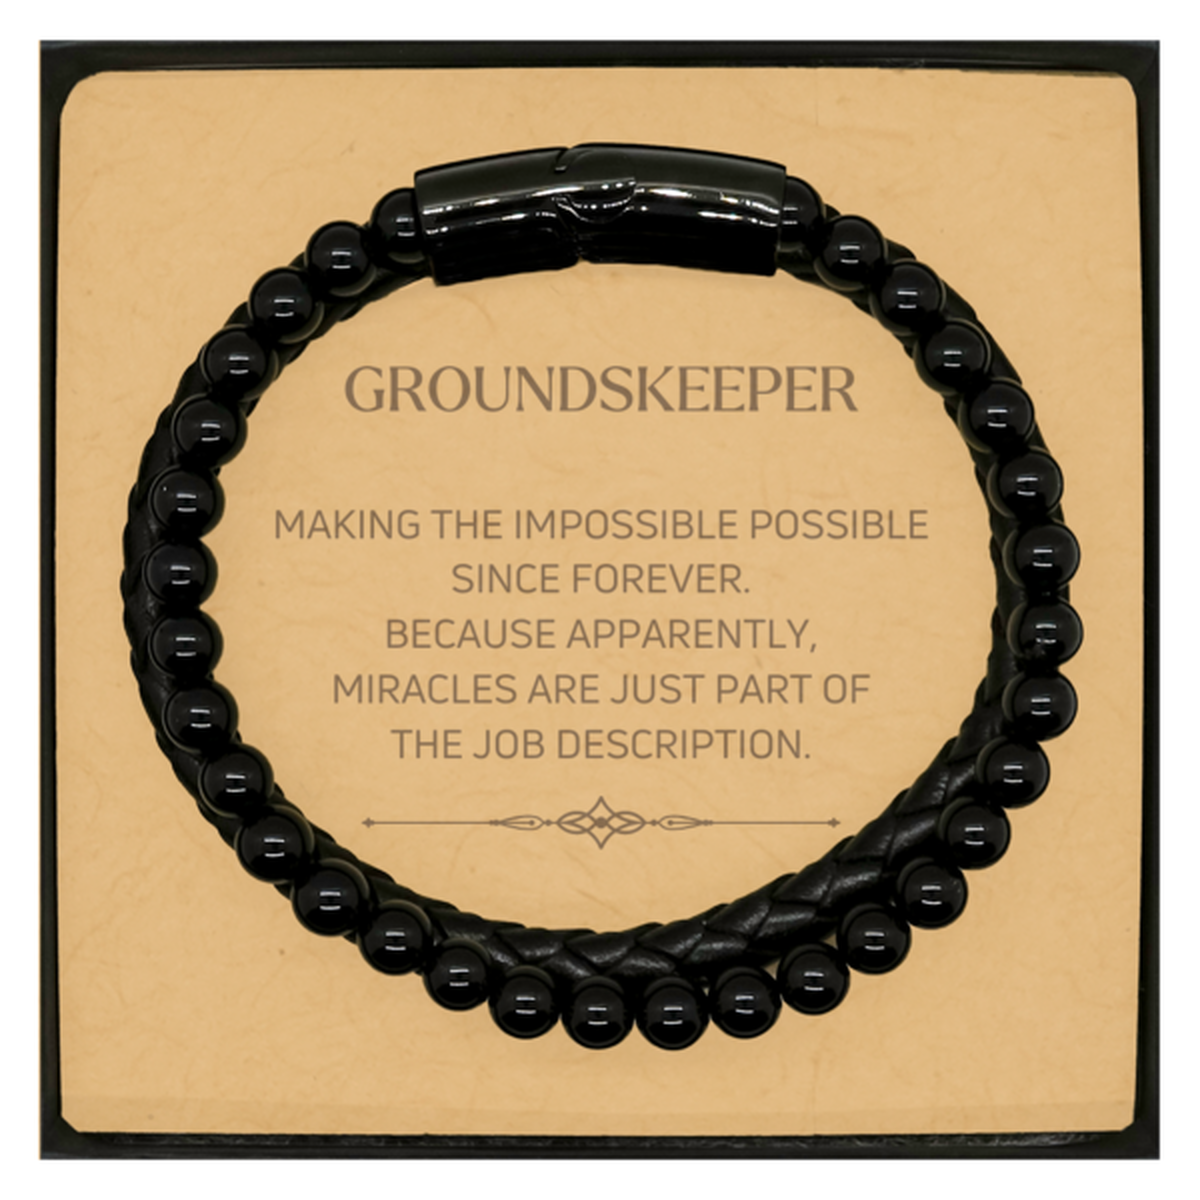 Funny Groundskeeper Gifts, Miracles are just part of the job description, Inspirational Birthday Christmas Stone Leather Bracelets For Groundskeeper, Men, Women, Coworkers, Friends, Boss